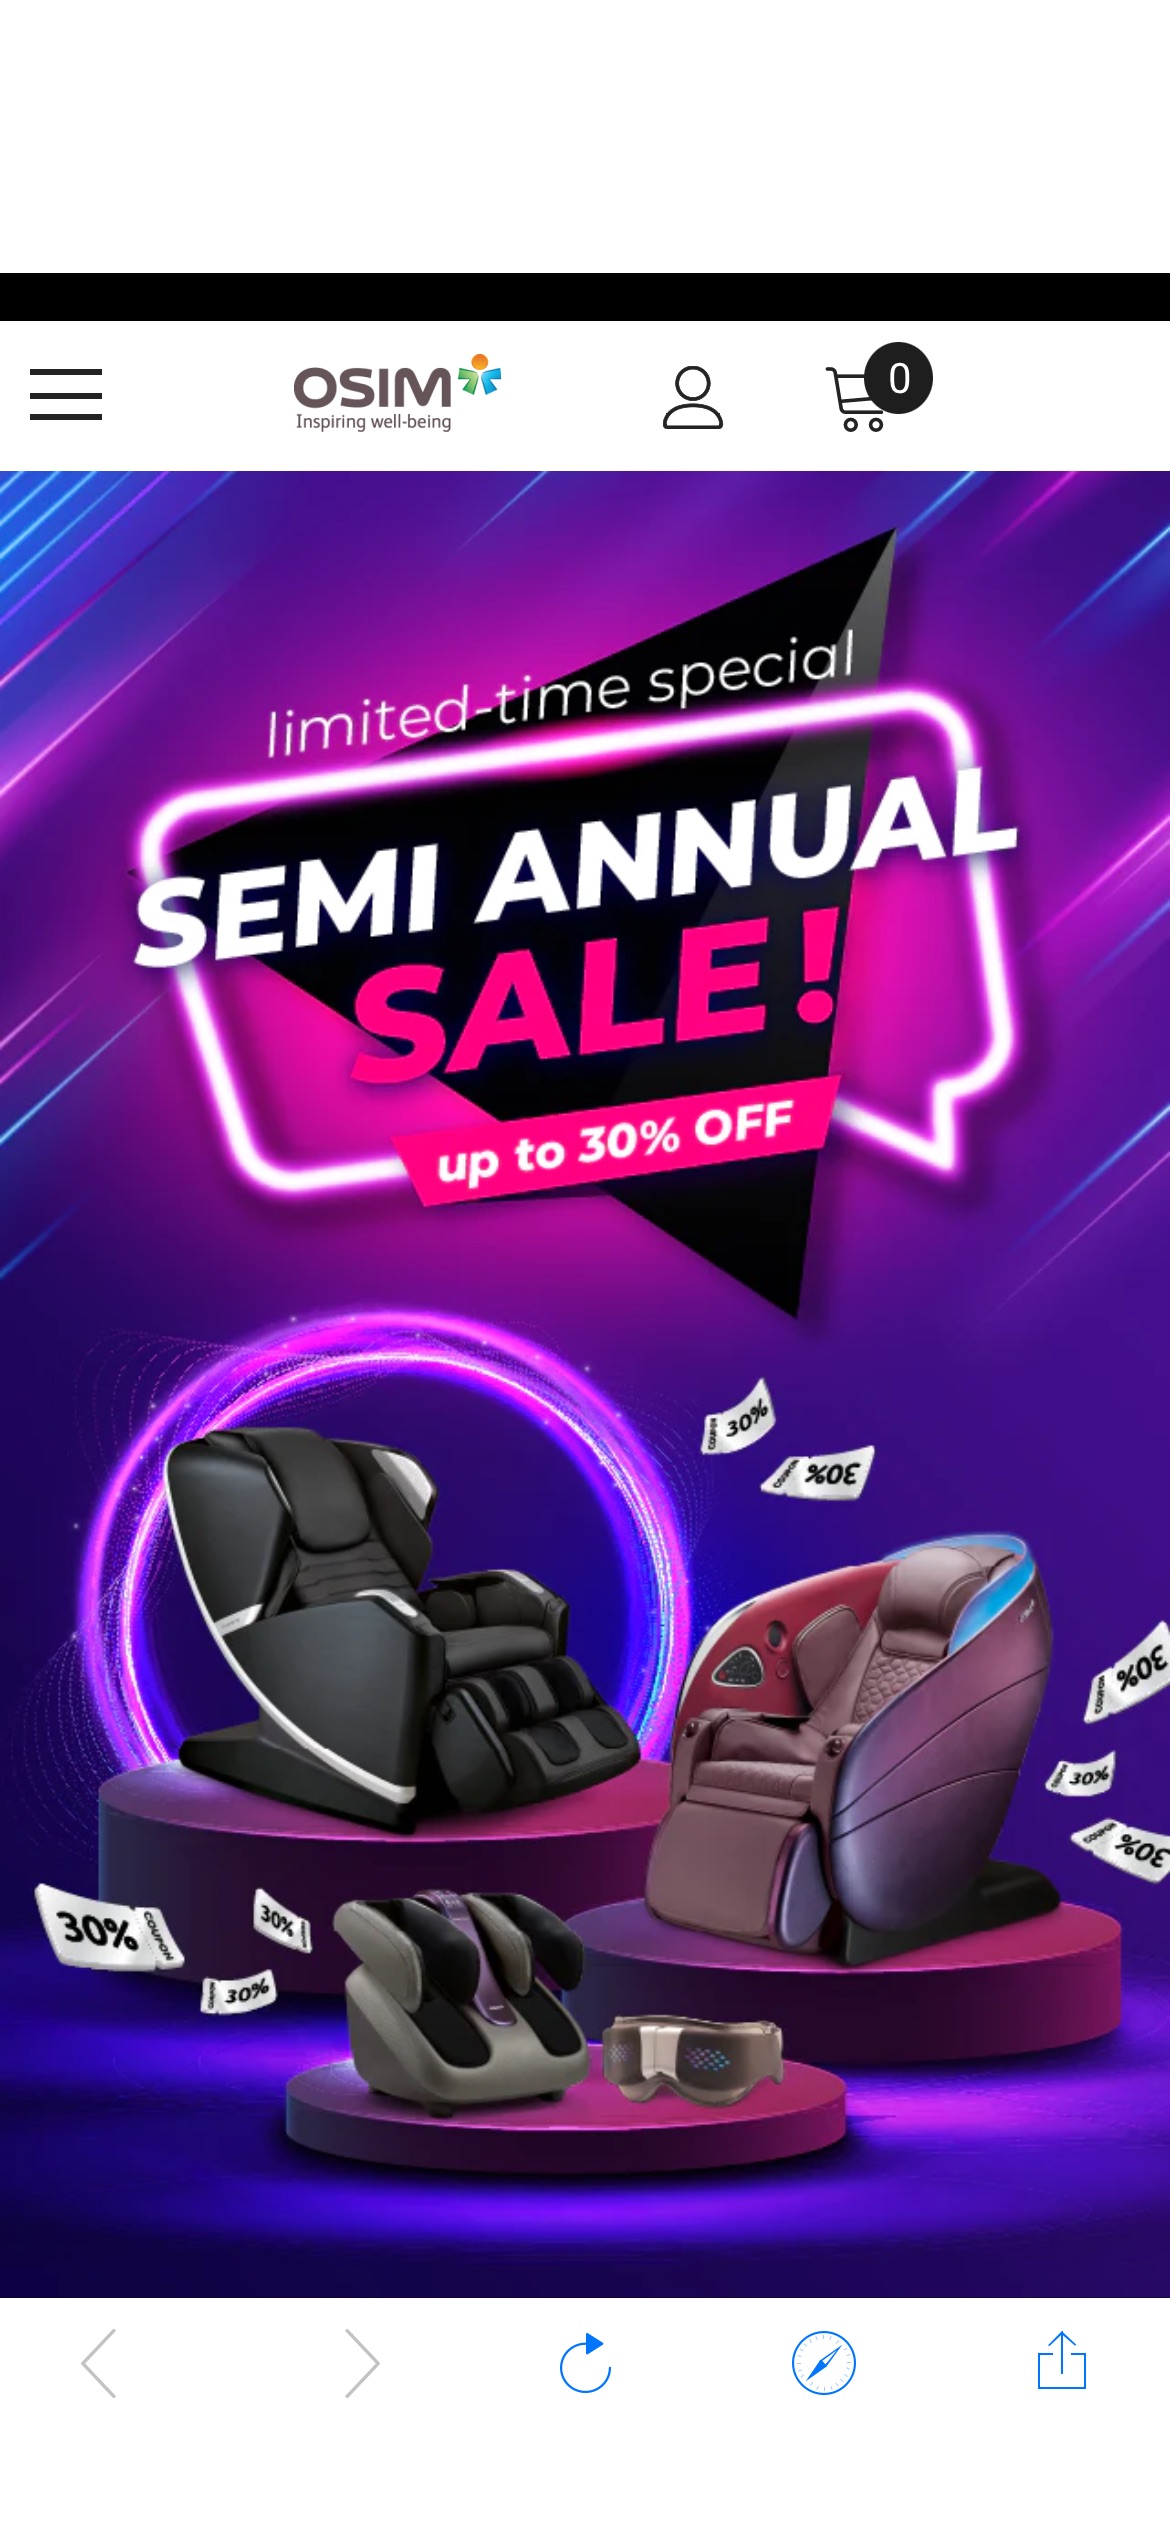 OSIM Canada | Massage Chairs, Back Massagers, Foot Massagers and More!